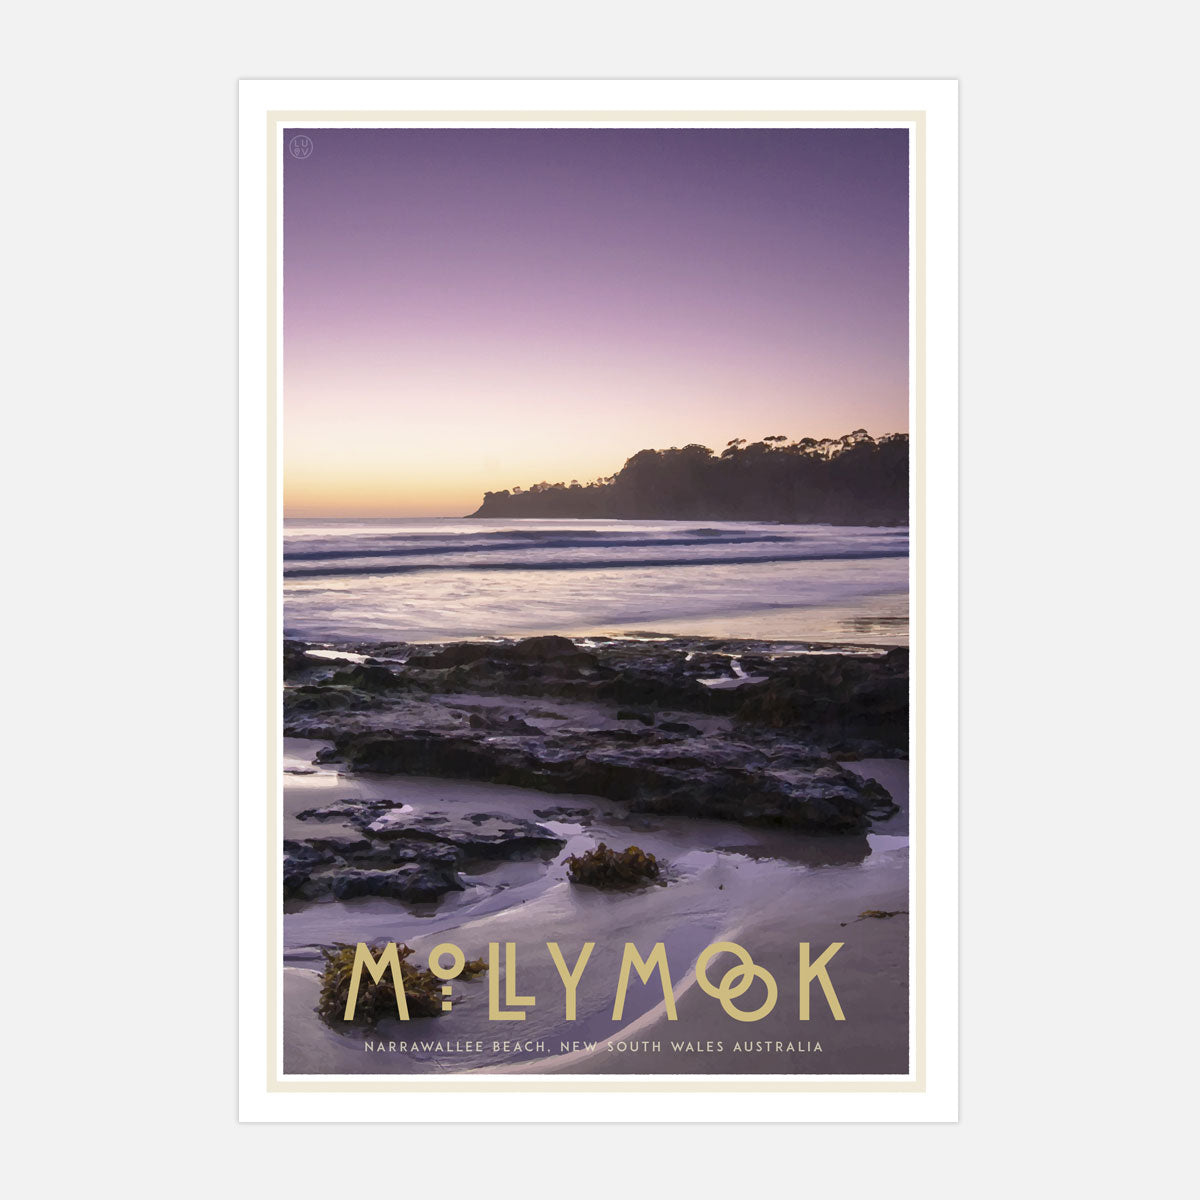 Mollymook print vintage travel poster style. Original design by Places We Luv